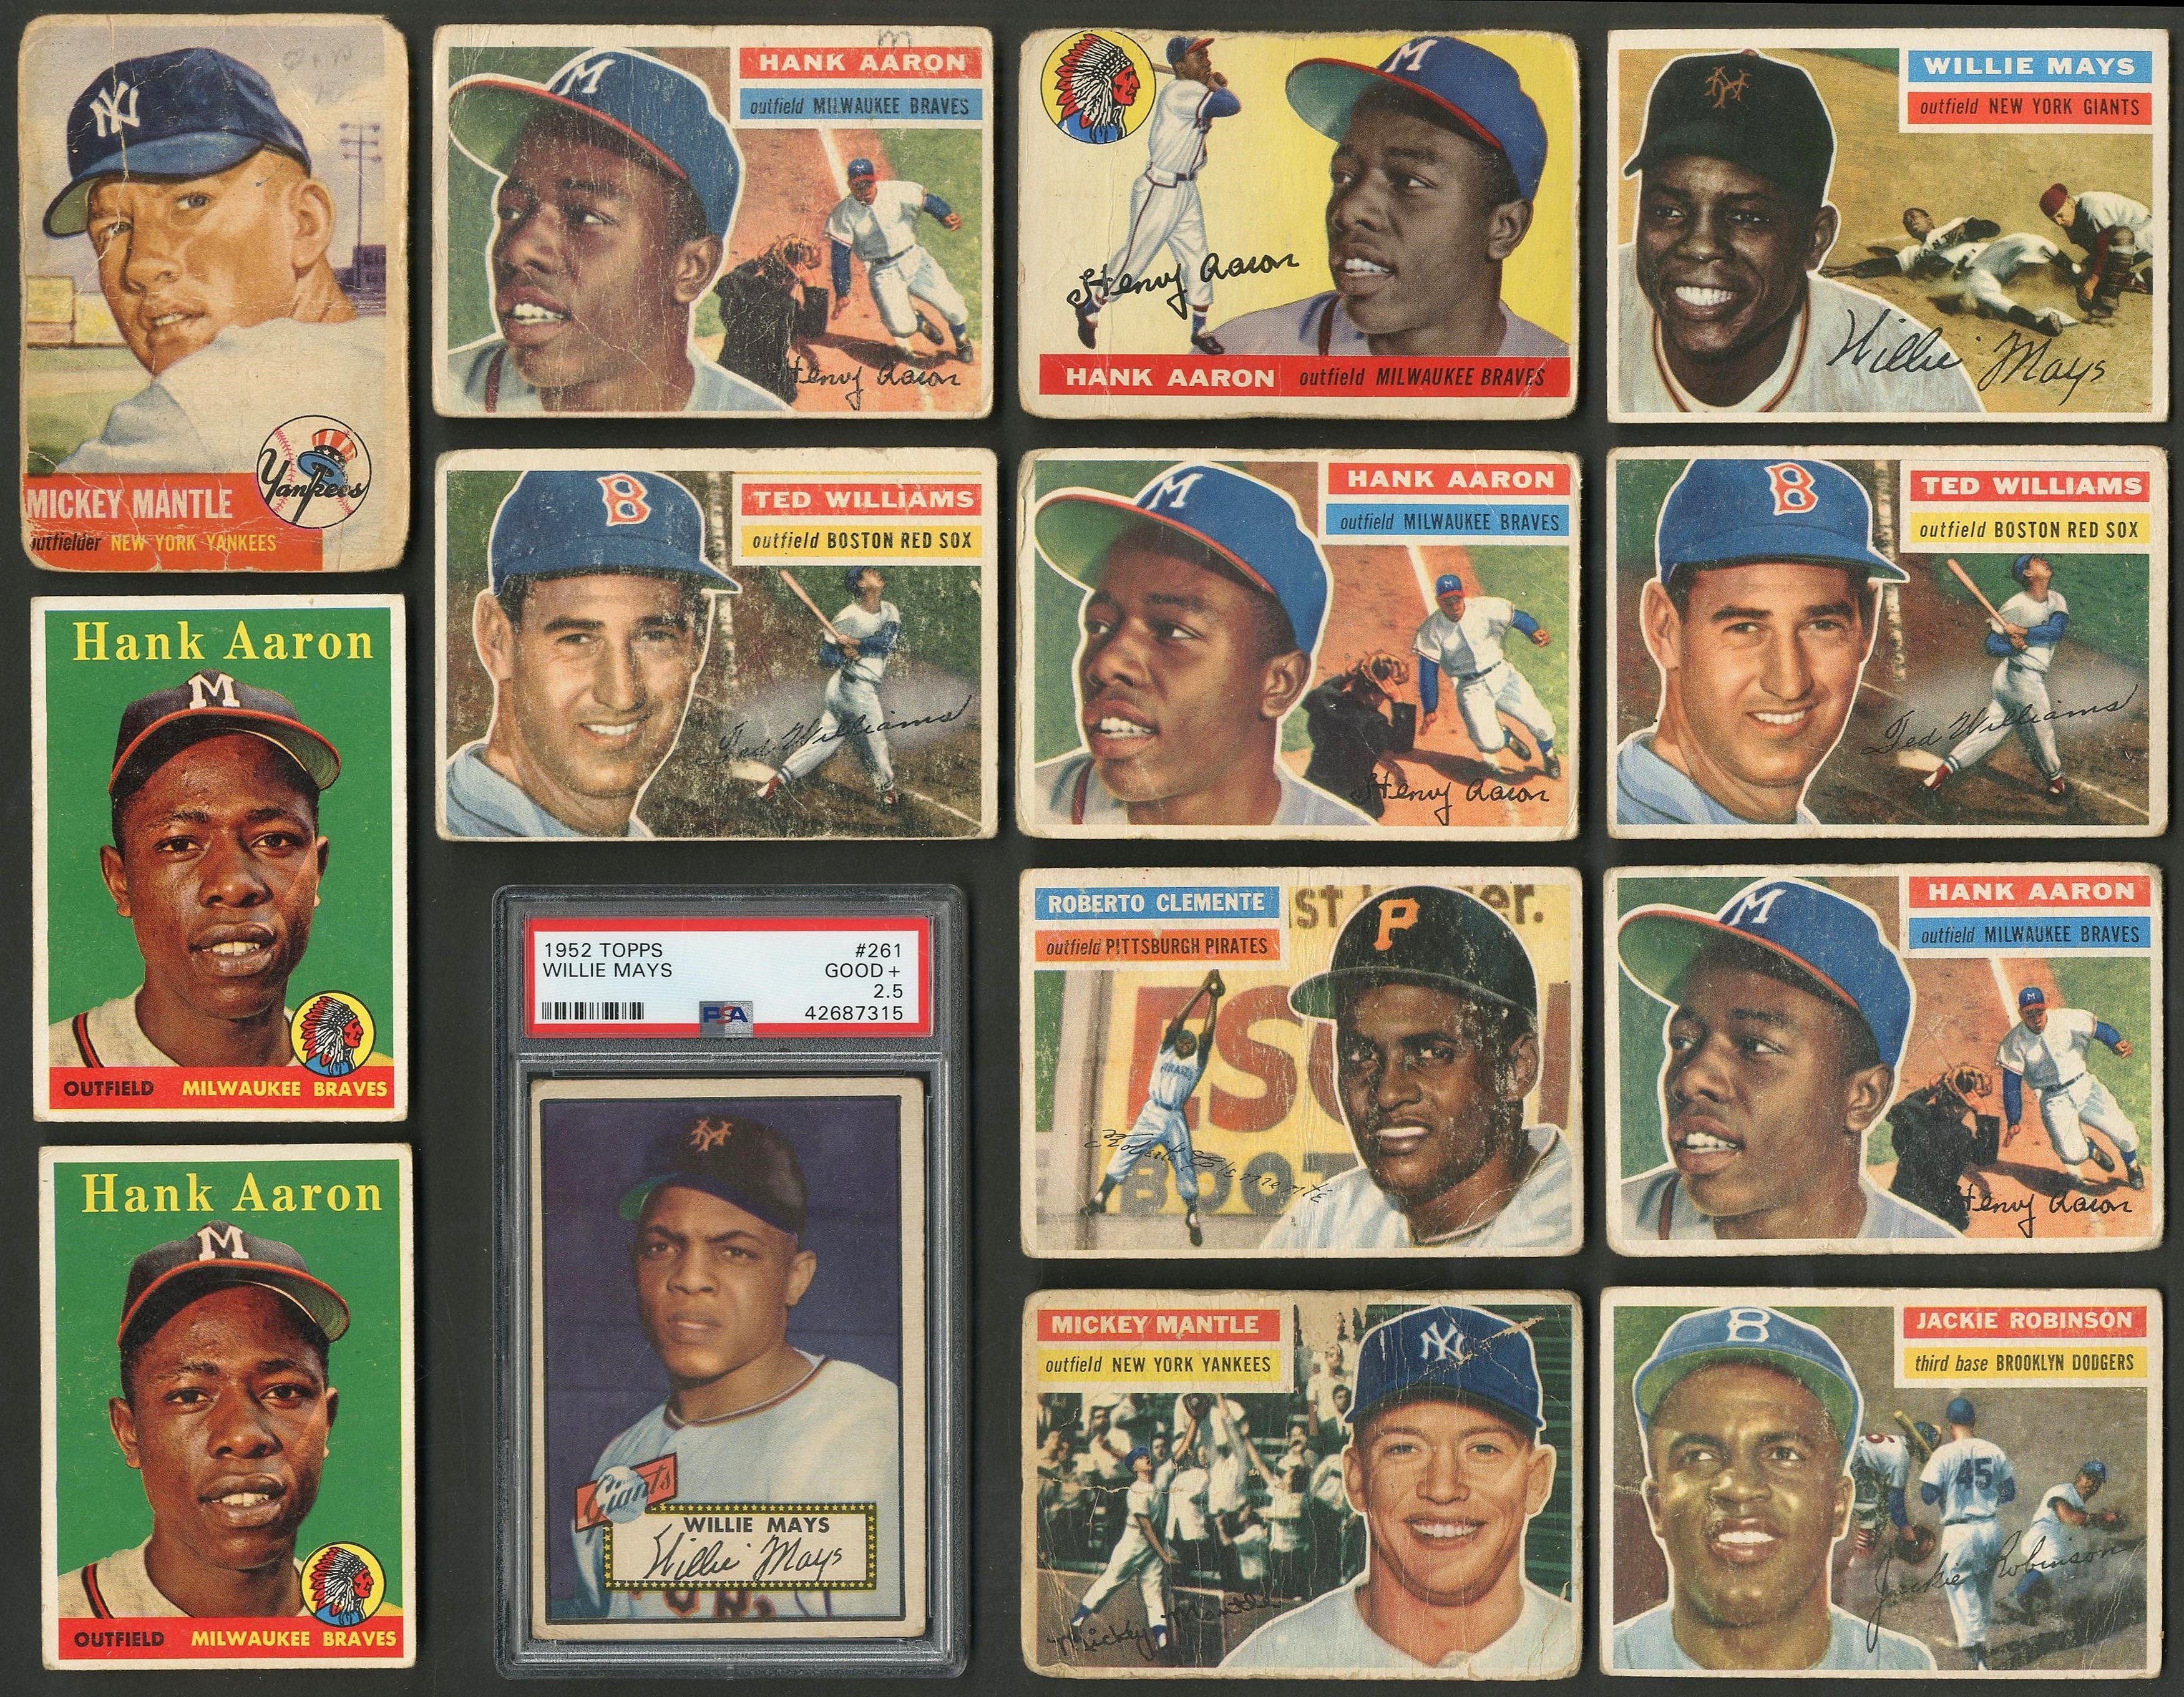 Baseball and Trading Cards - 1950s Topps Hall of Famer Collection - Mantle (15), Aaron (13), Mays (13), Williams (9) (160+) PSA